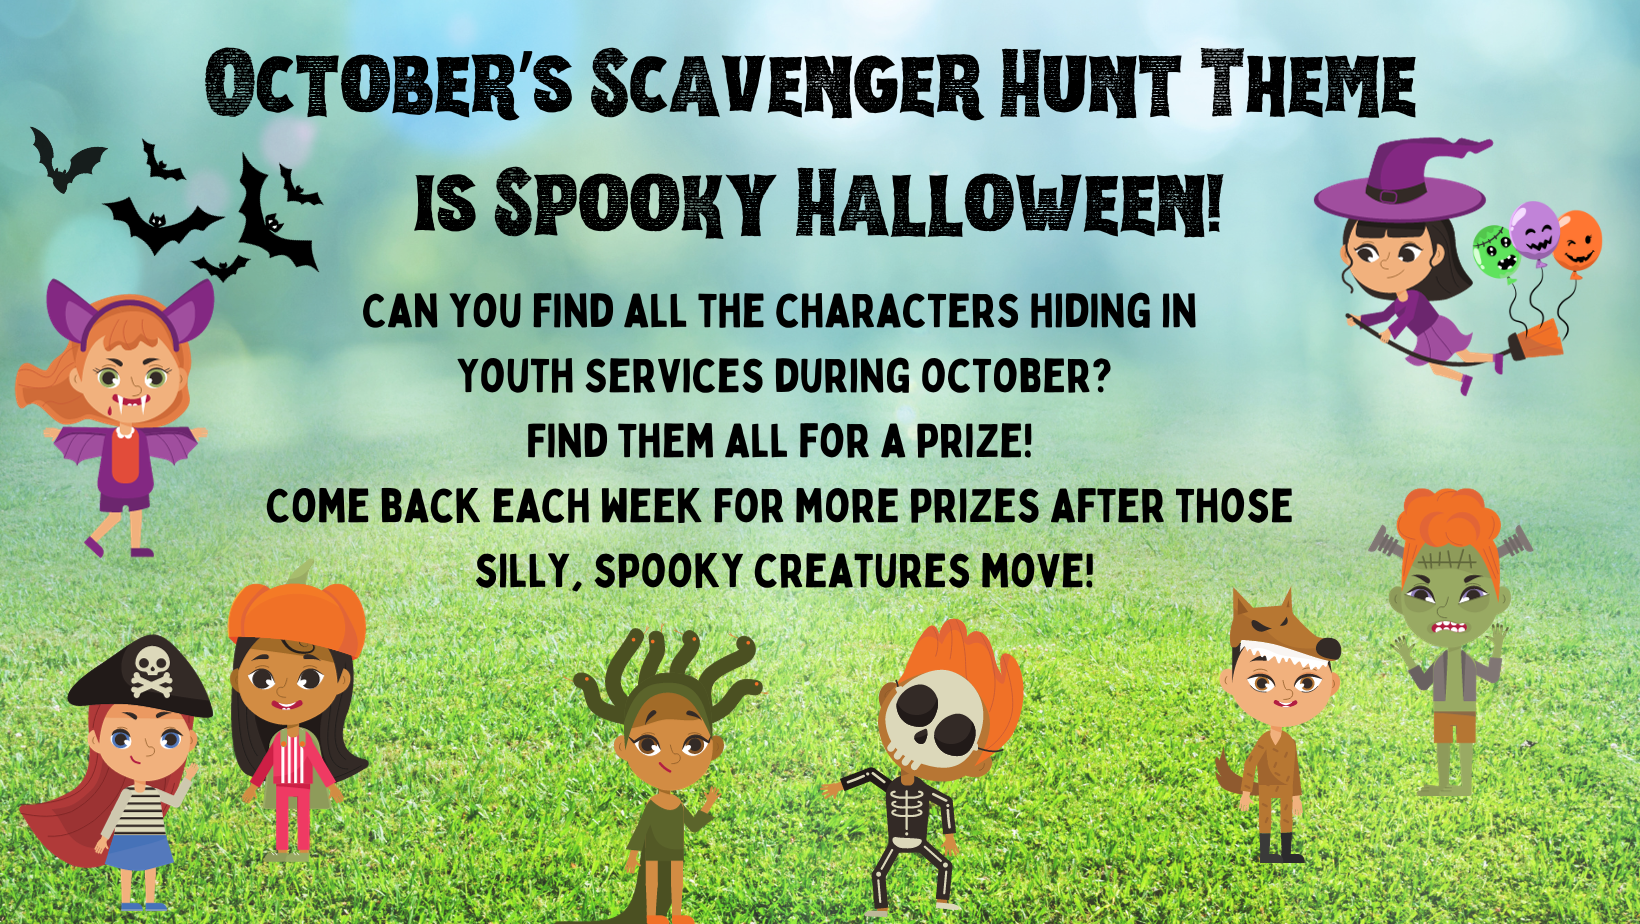 October Scavenger Hunt in Youth Services - Spooky Halloween